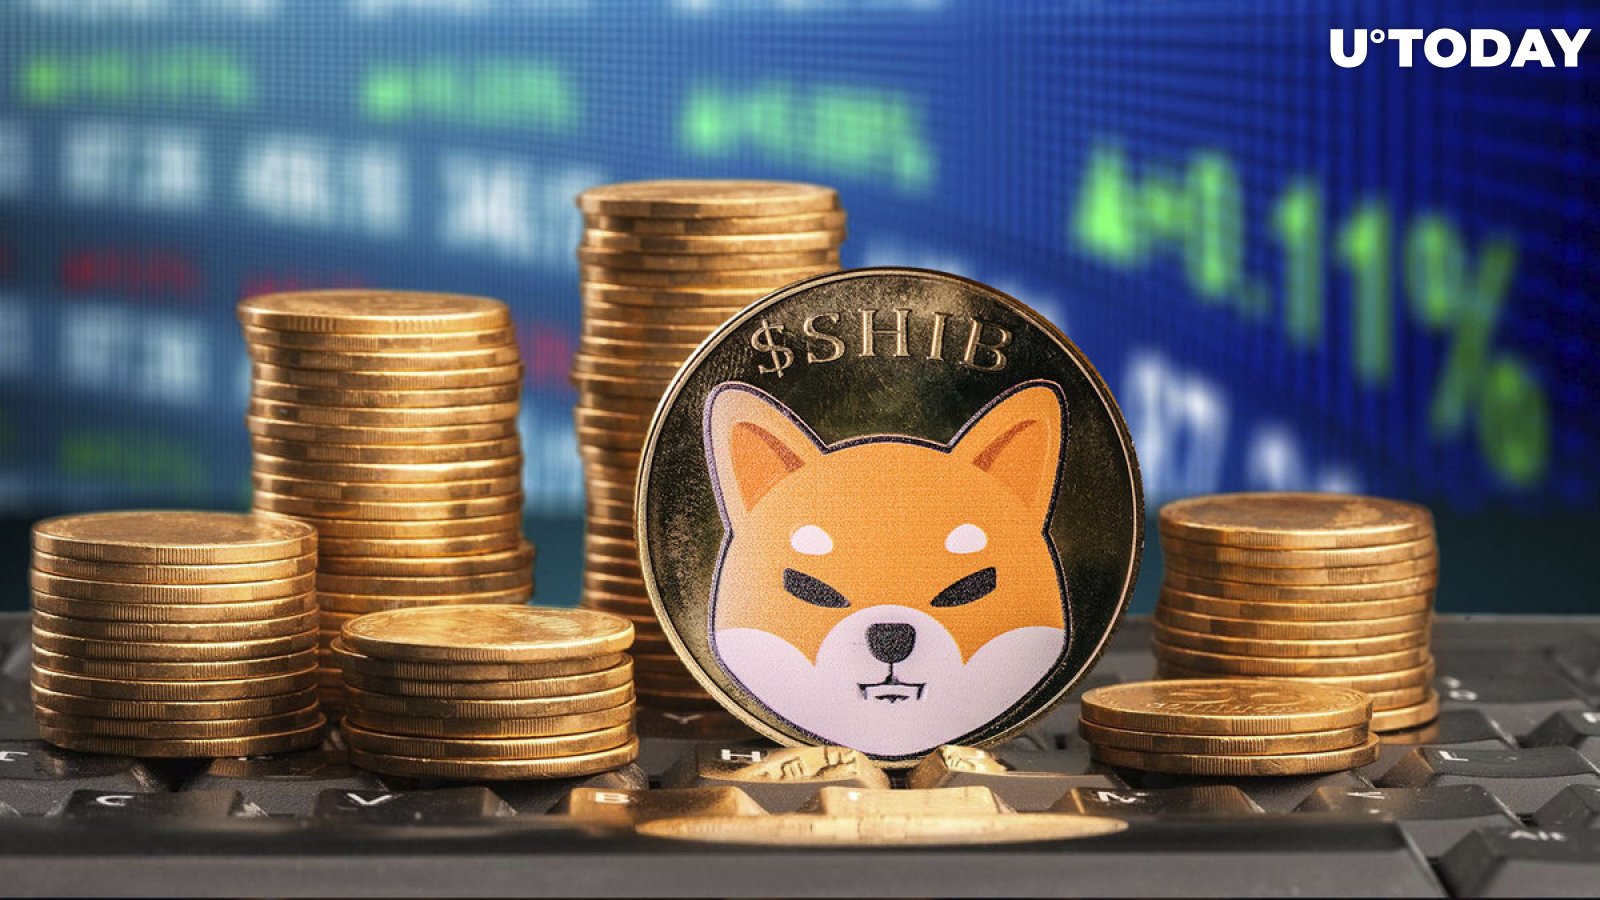 Huge 2 billion Shiba Inu (SHIB) in the last 24 hours: exchanges, whales and more